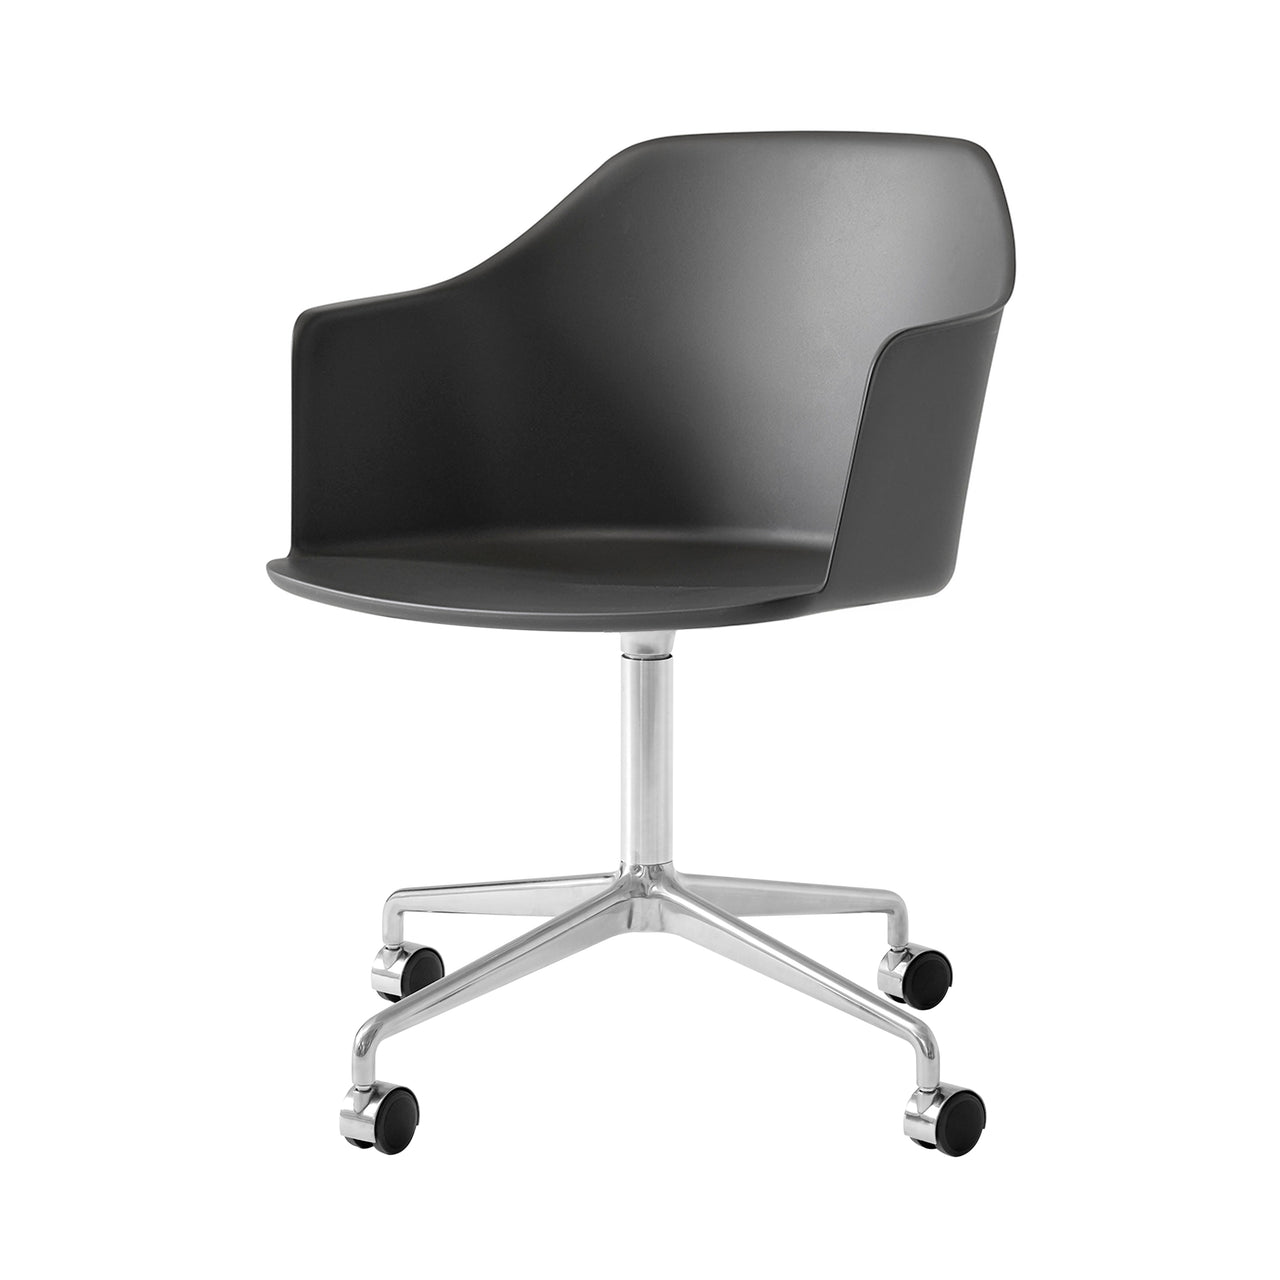 Rely Chair HW48: Black + Polished Aluminum